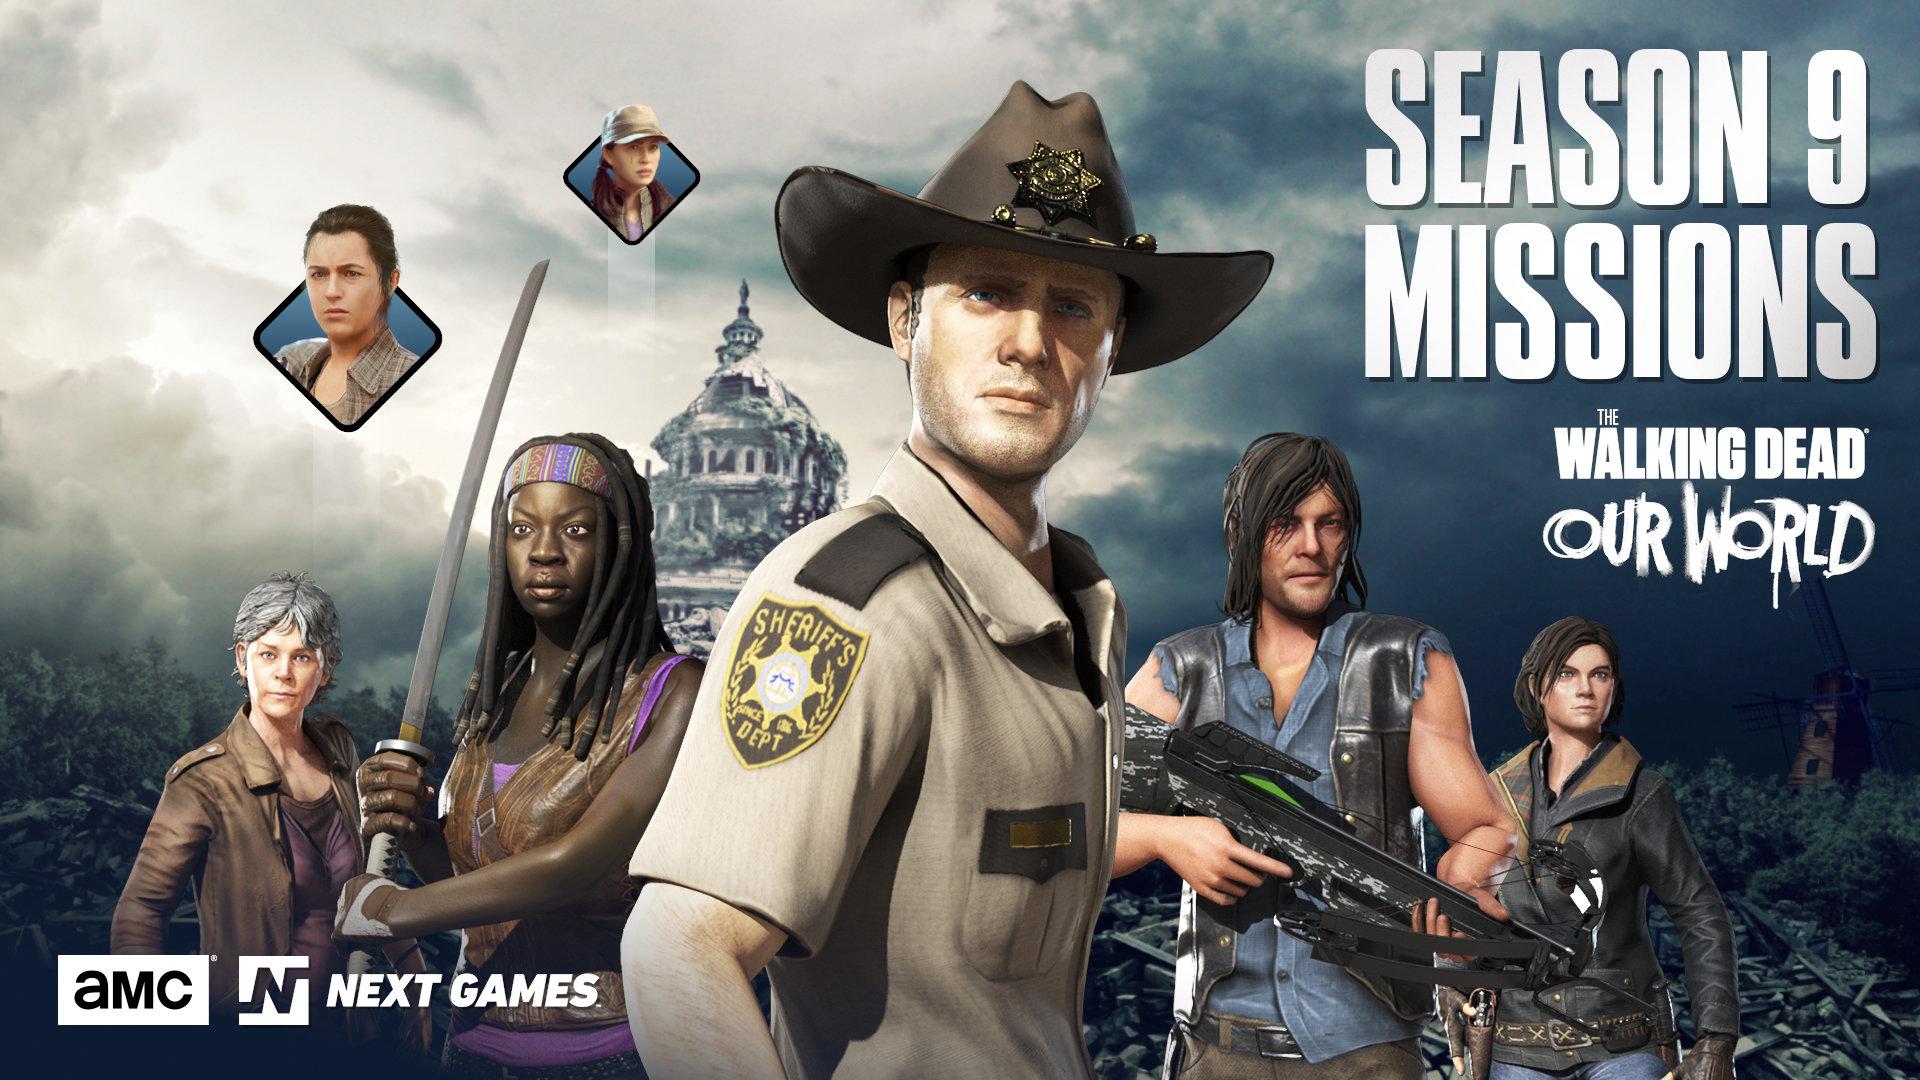 The Walking Dead' mobile game will keep pace with the TV show